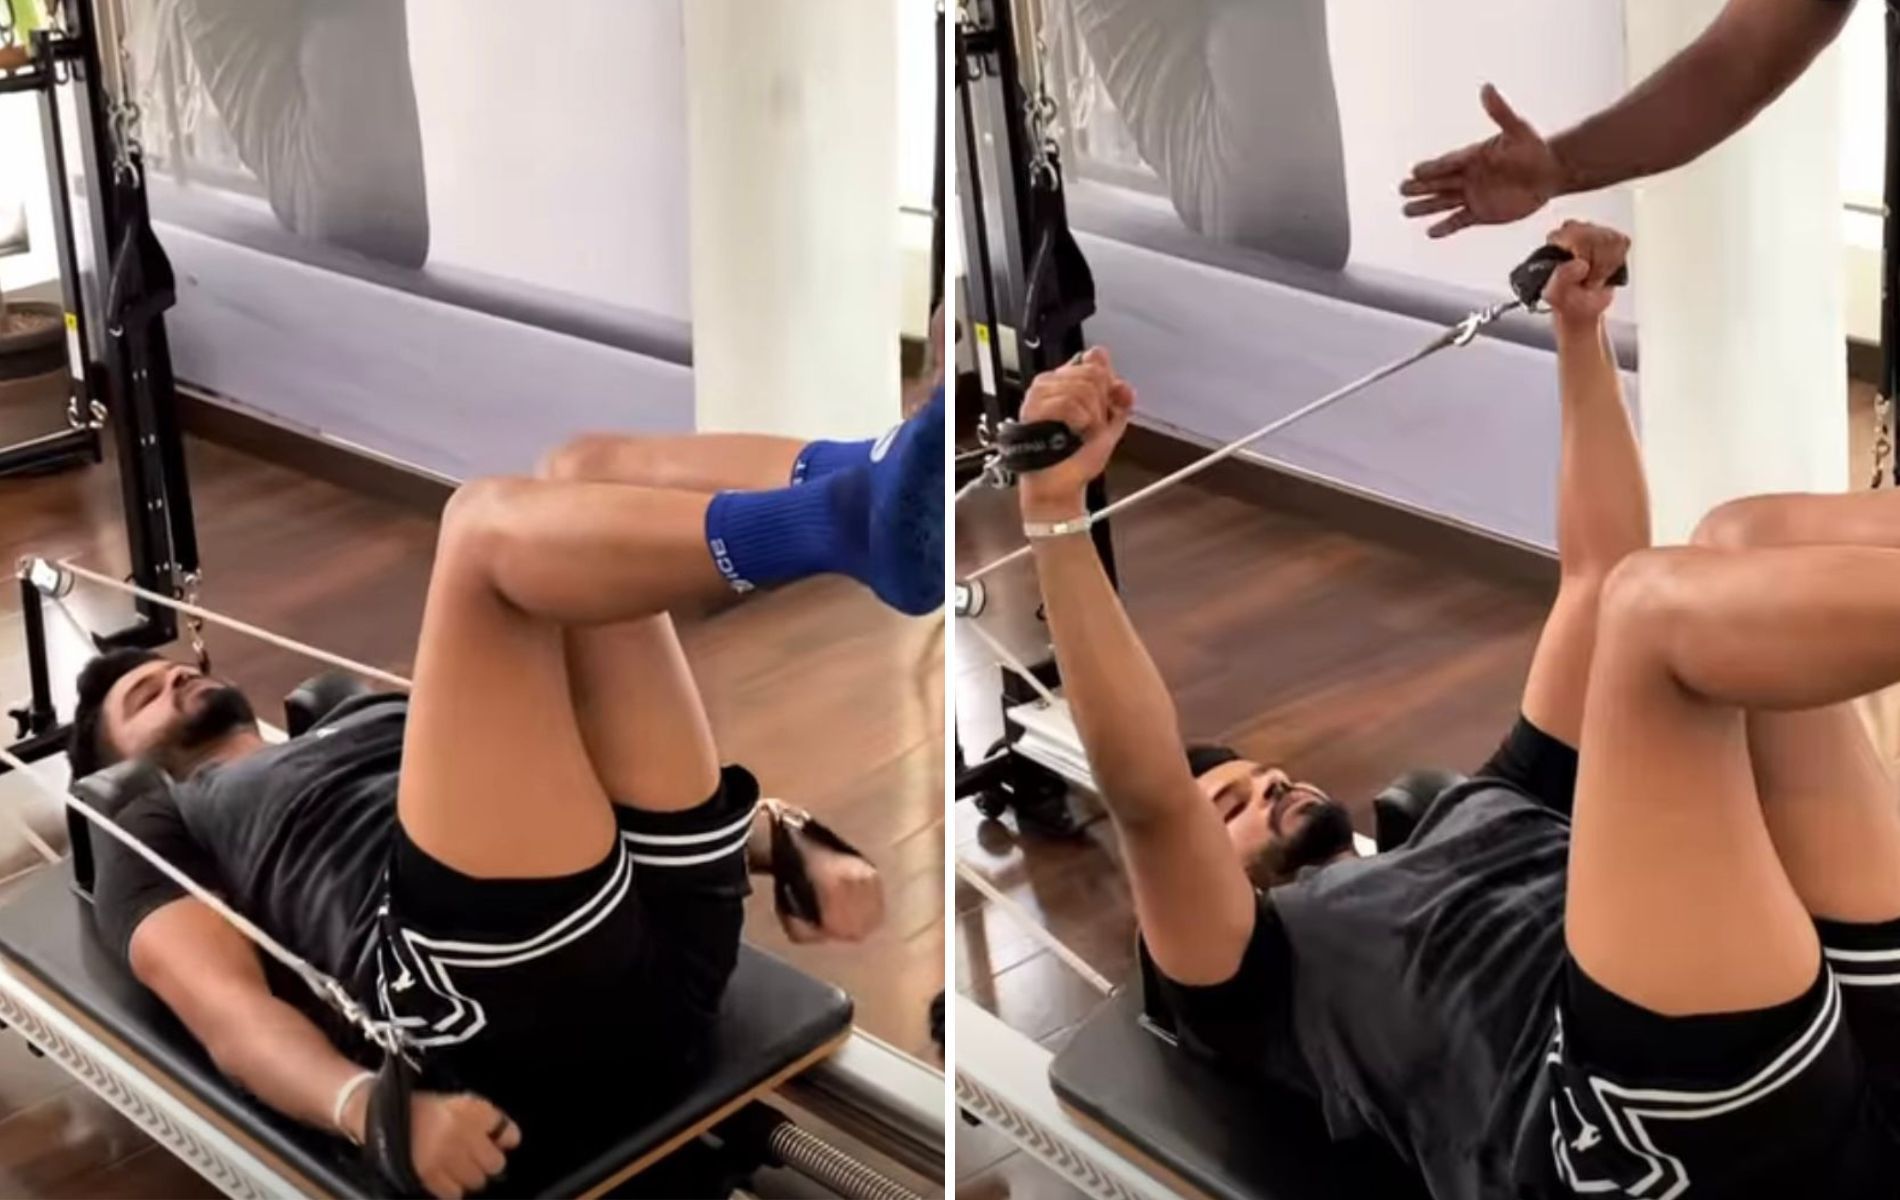 Shreyas Iyer during a recent workout session. (Pics: Instagram)